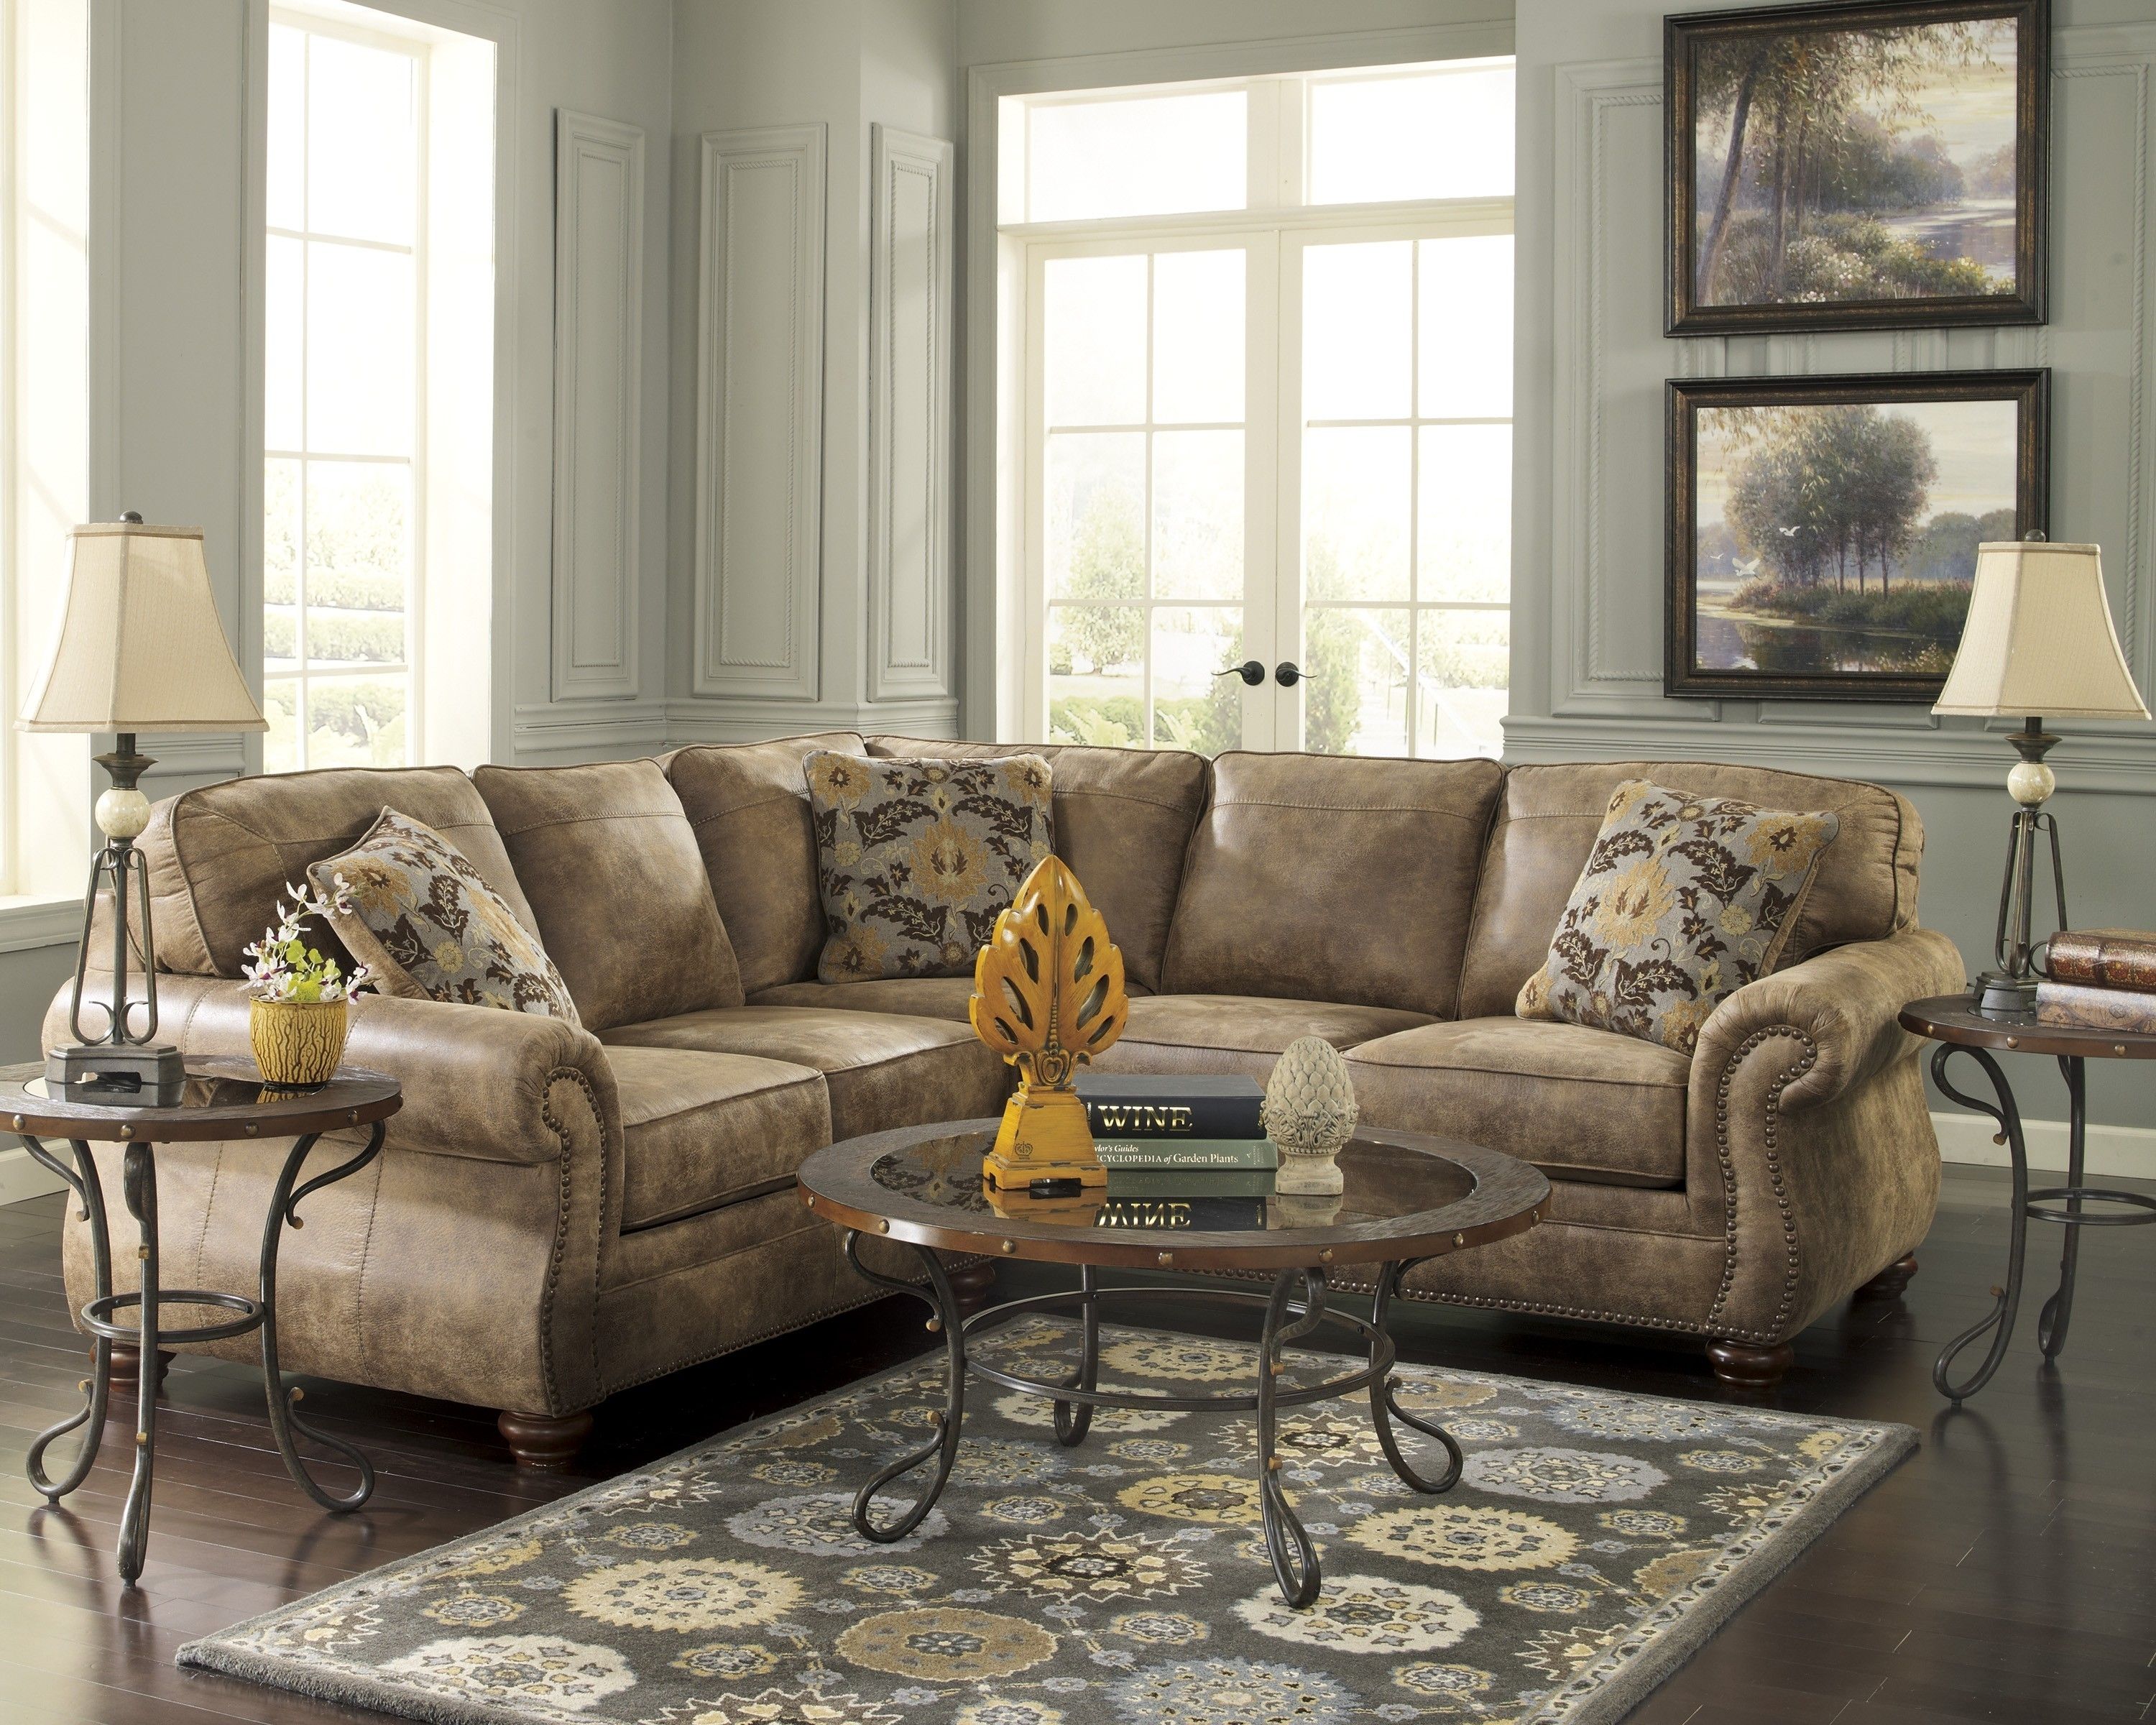 Photos Sectional Sofas Tucson – Buildsimplehome With Tucson Sectional Sofas (View 2 of 10)